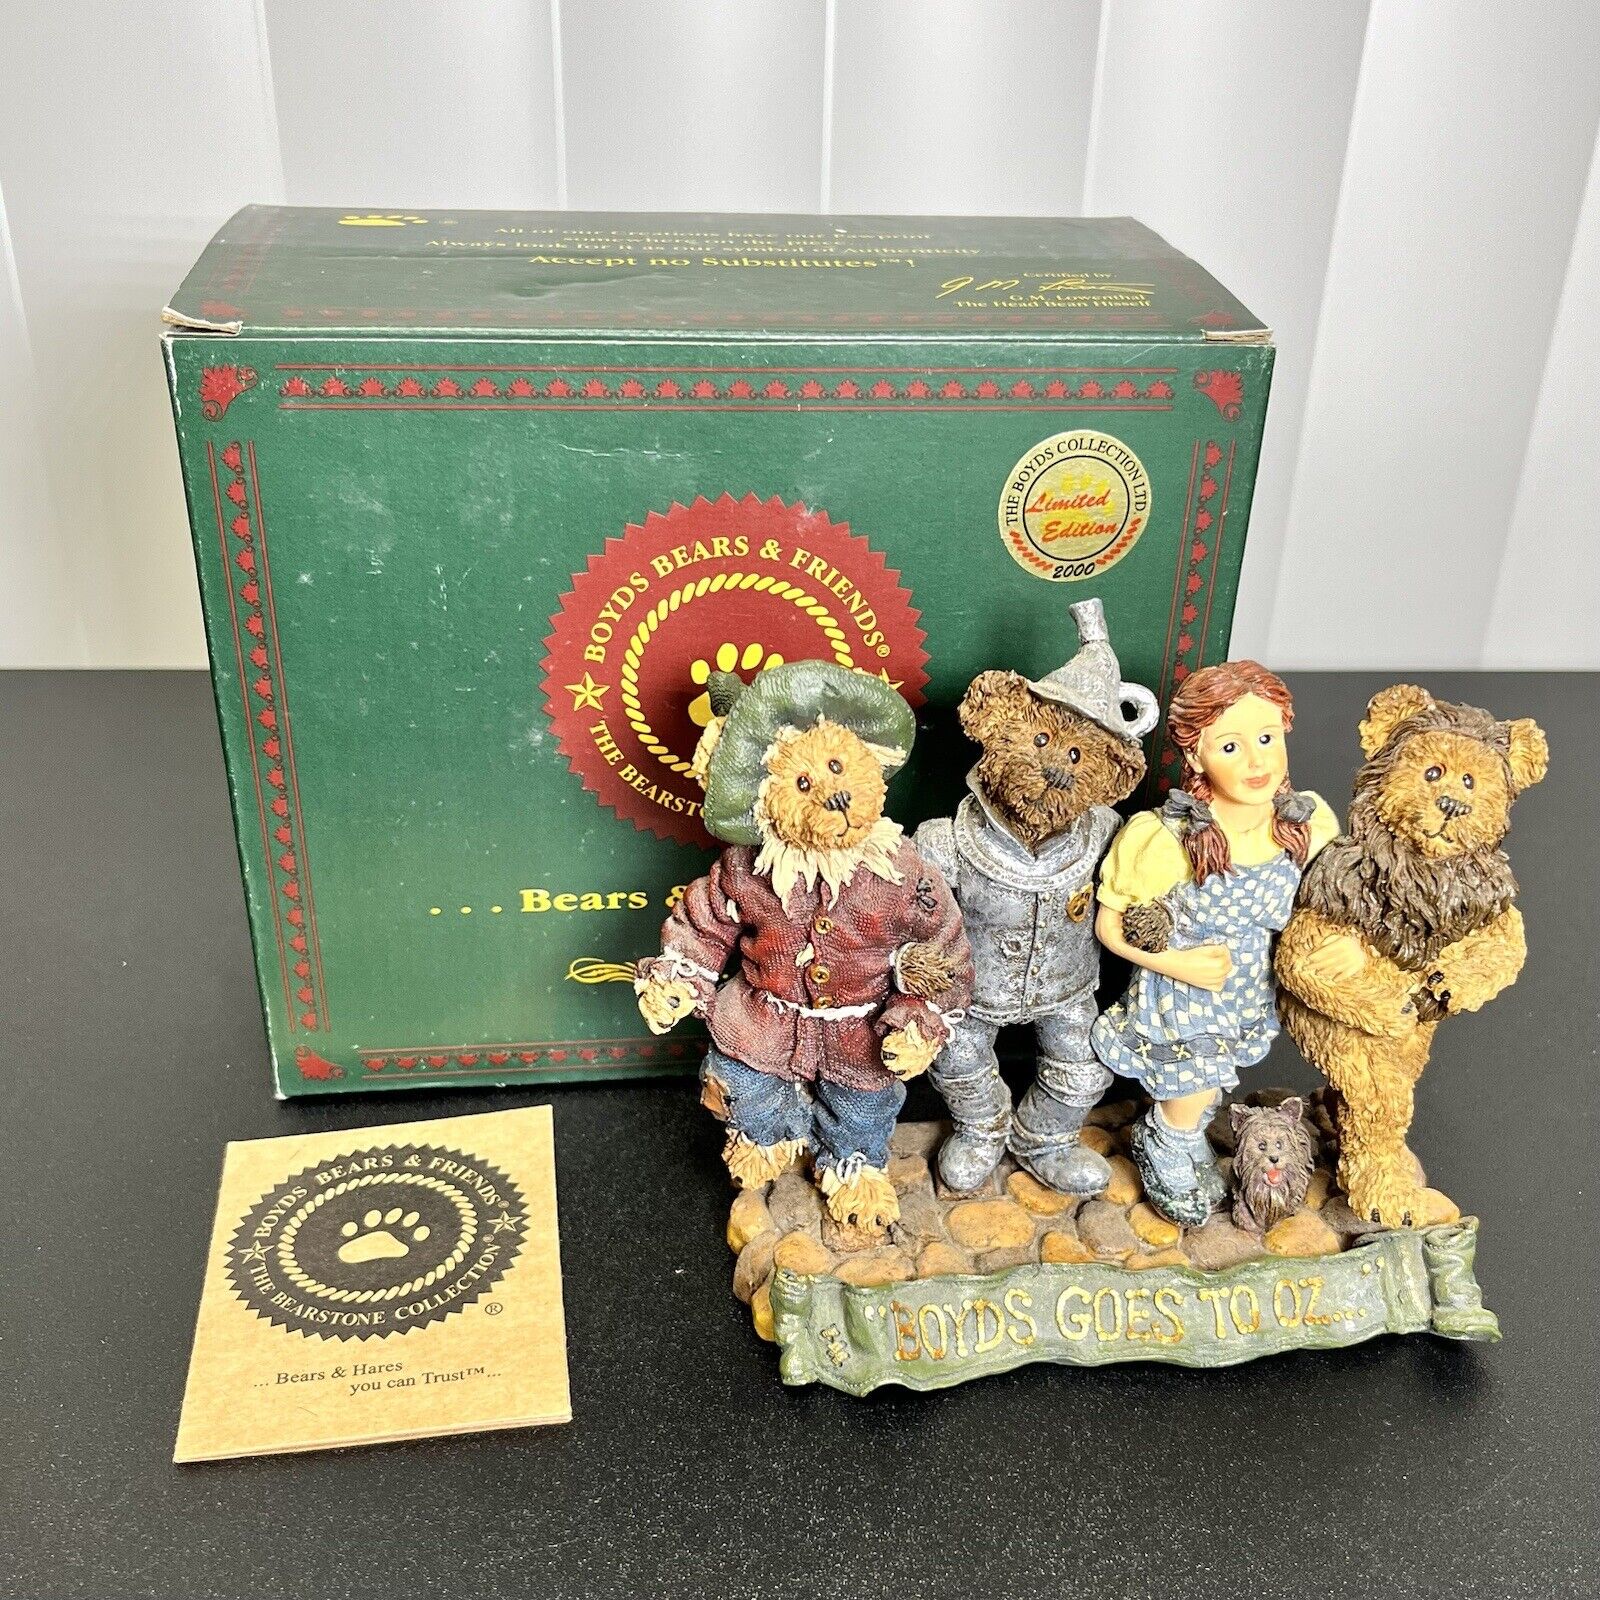 Boyds Wizard Of Oz “Boyds Goes To Oz” Bearstone Collection 2000, #227807